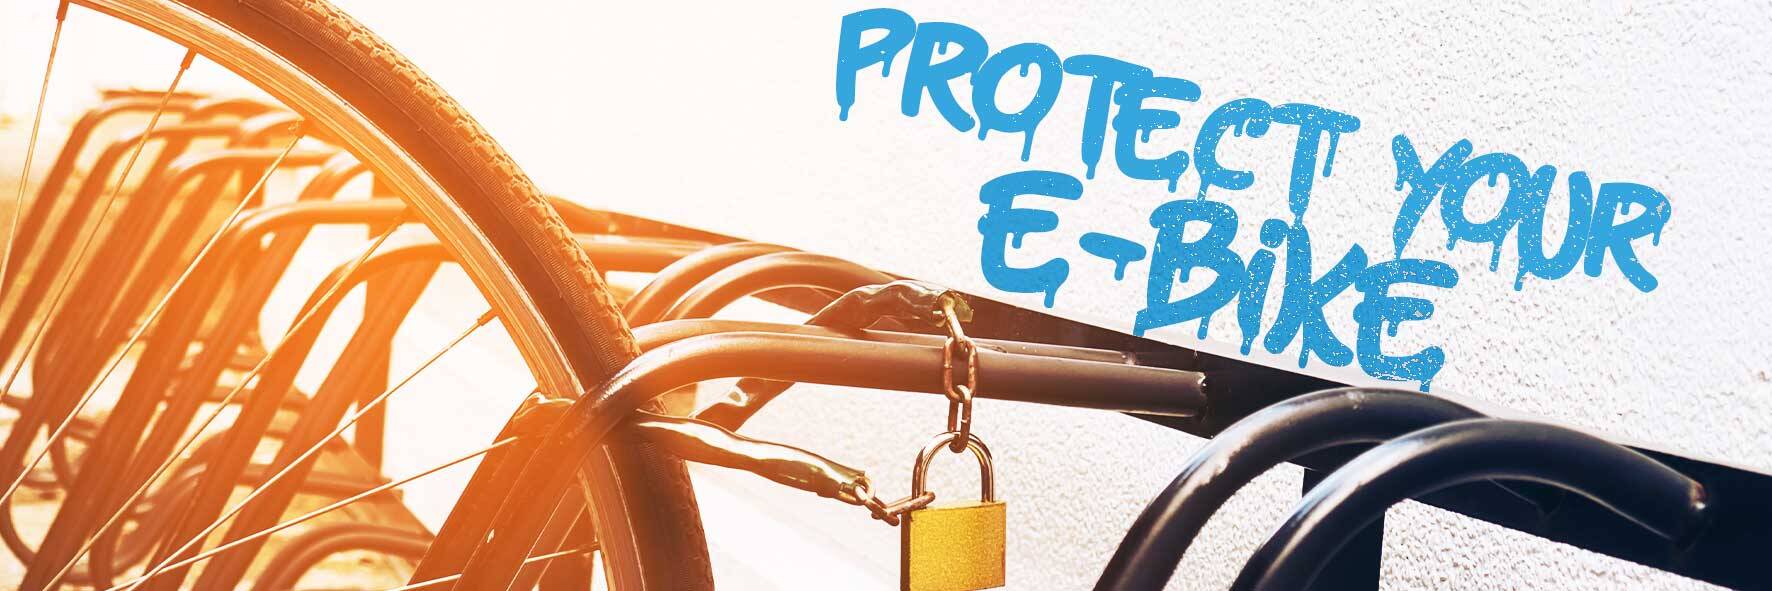 Protect Your Electric Bike with E-Bikes Direct